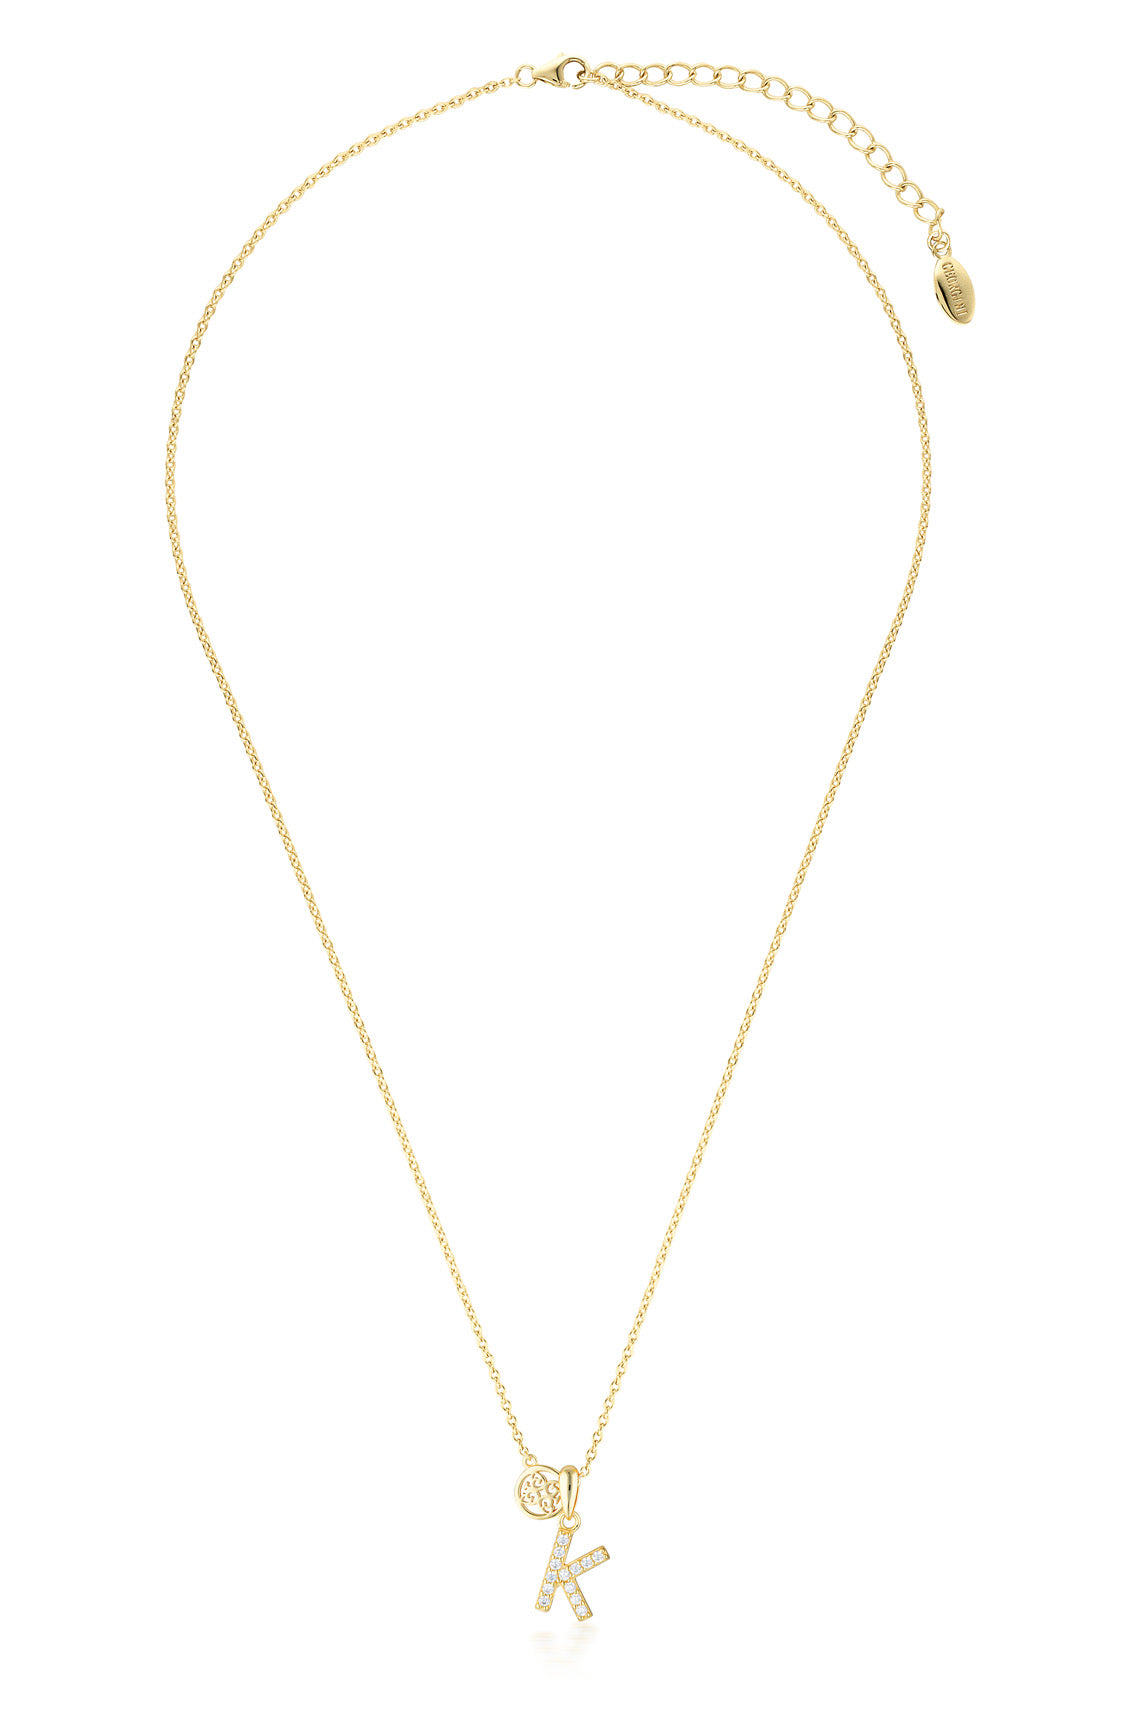 LUXURY LETTERS K INITIAL PENDANT GOLD